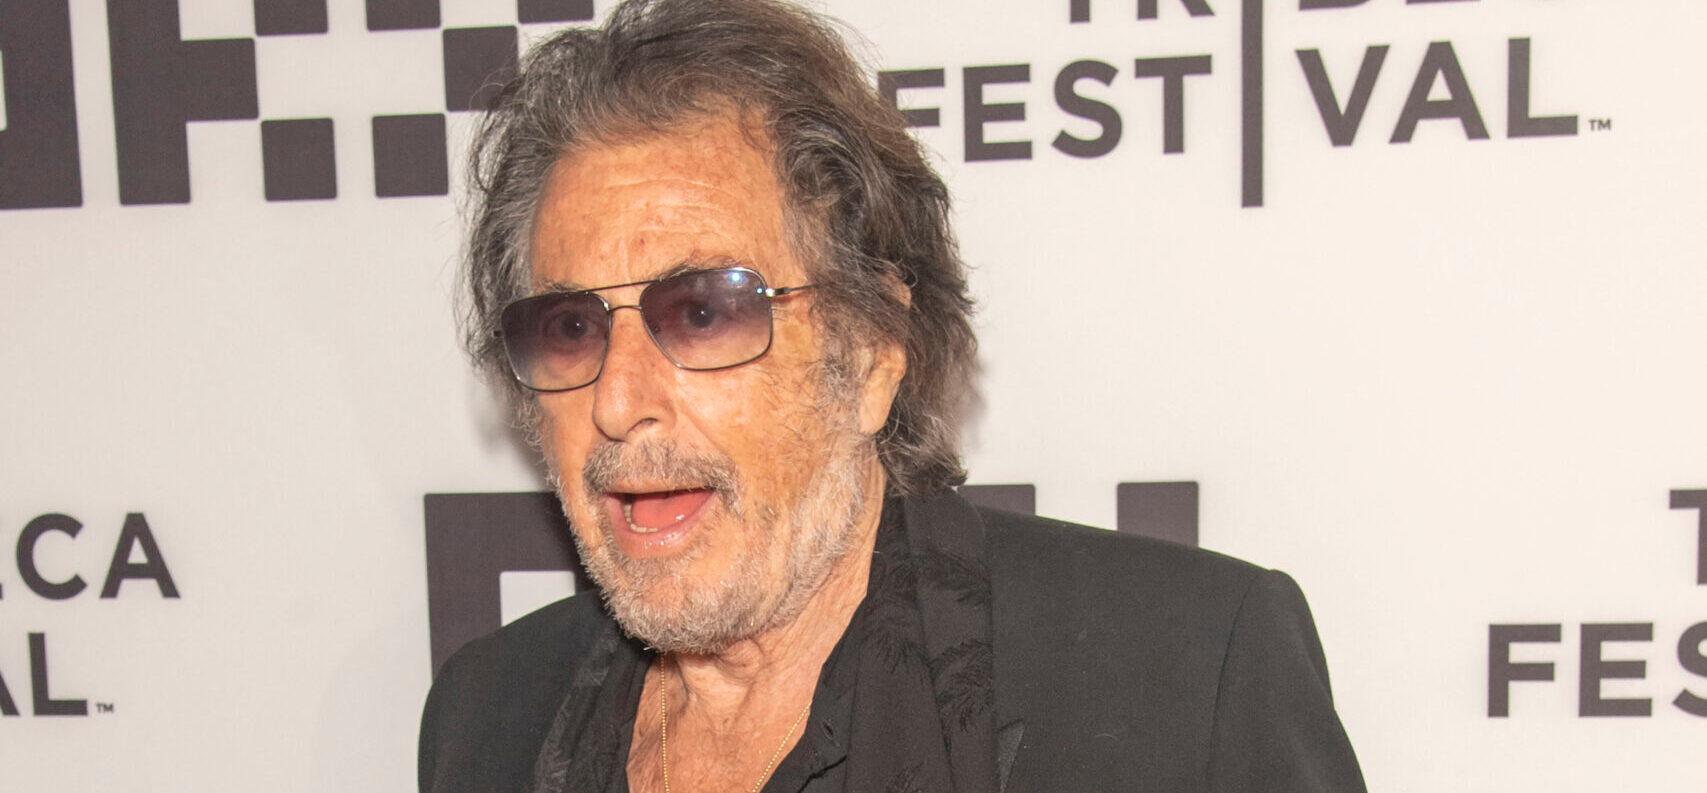 Al Pacino's Girlfriend Gives Birth, Actor Is A Father Again At 83 Years Old!